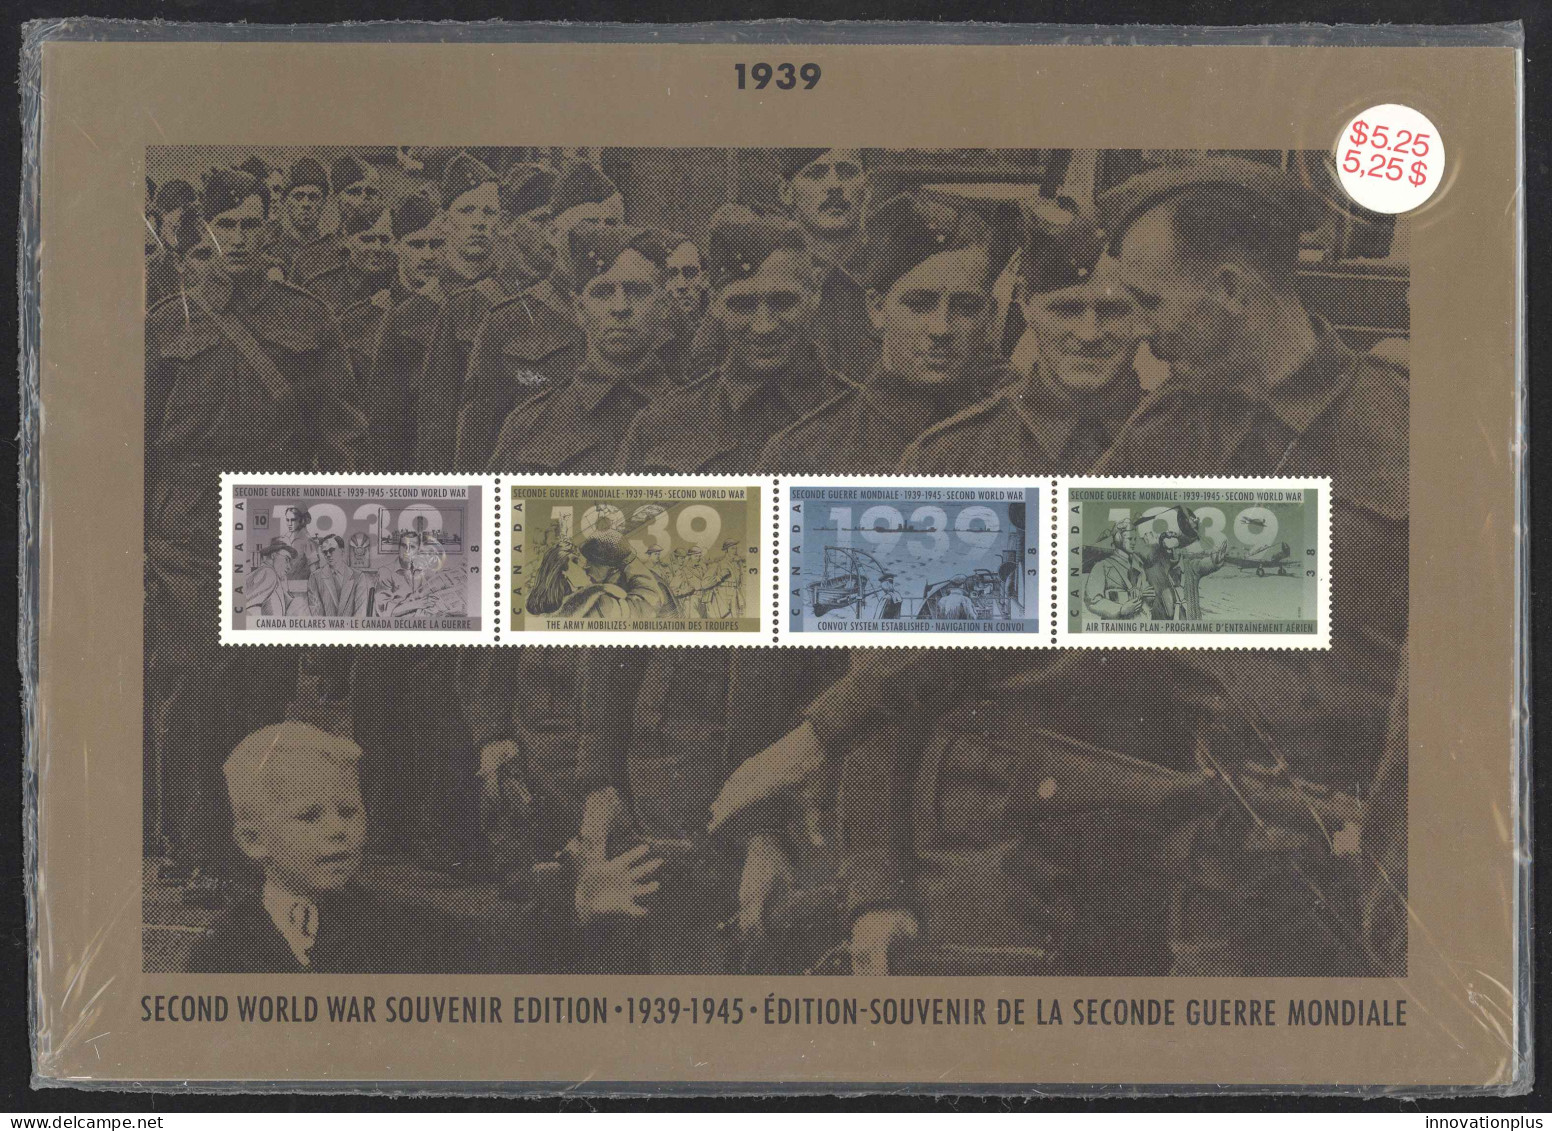 Canada Post Thematic Sc# 43 Mint (SEALED) 1989 WWII 1939 - Canada Post Year Sets/merchandise